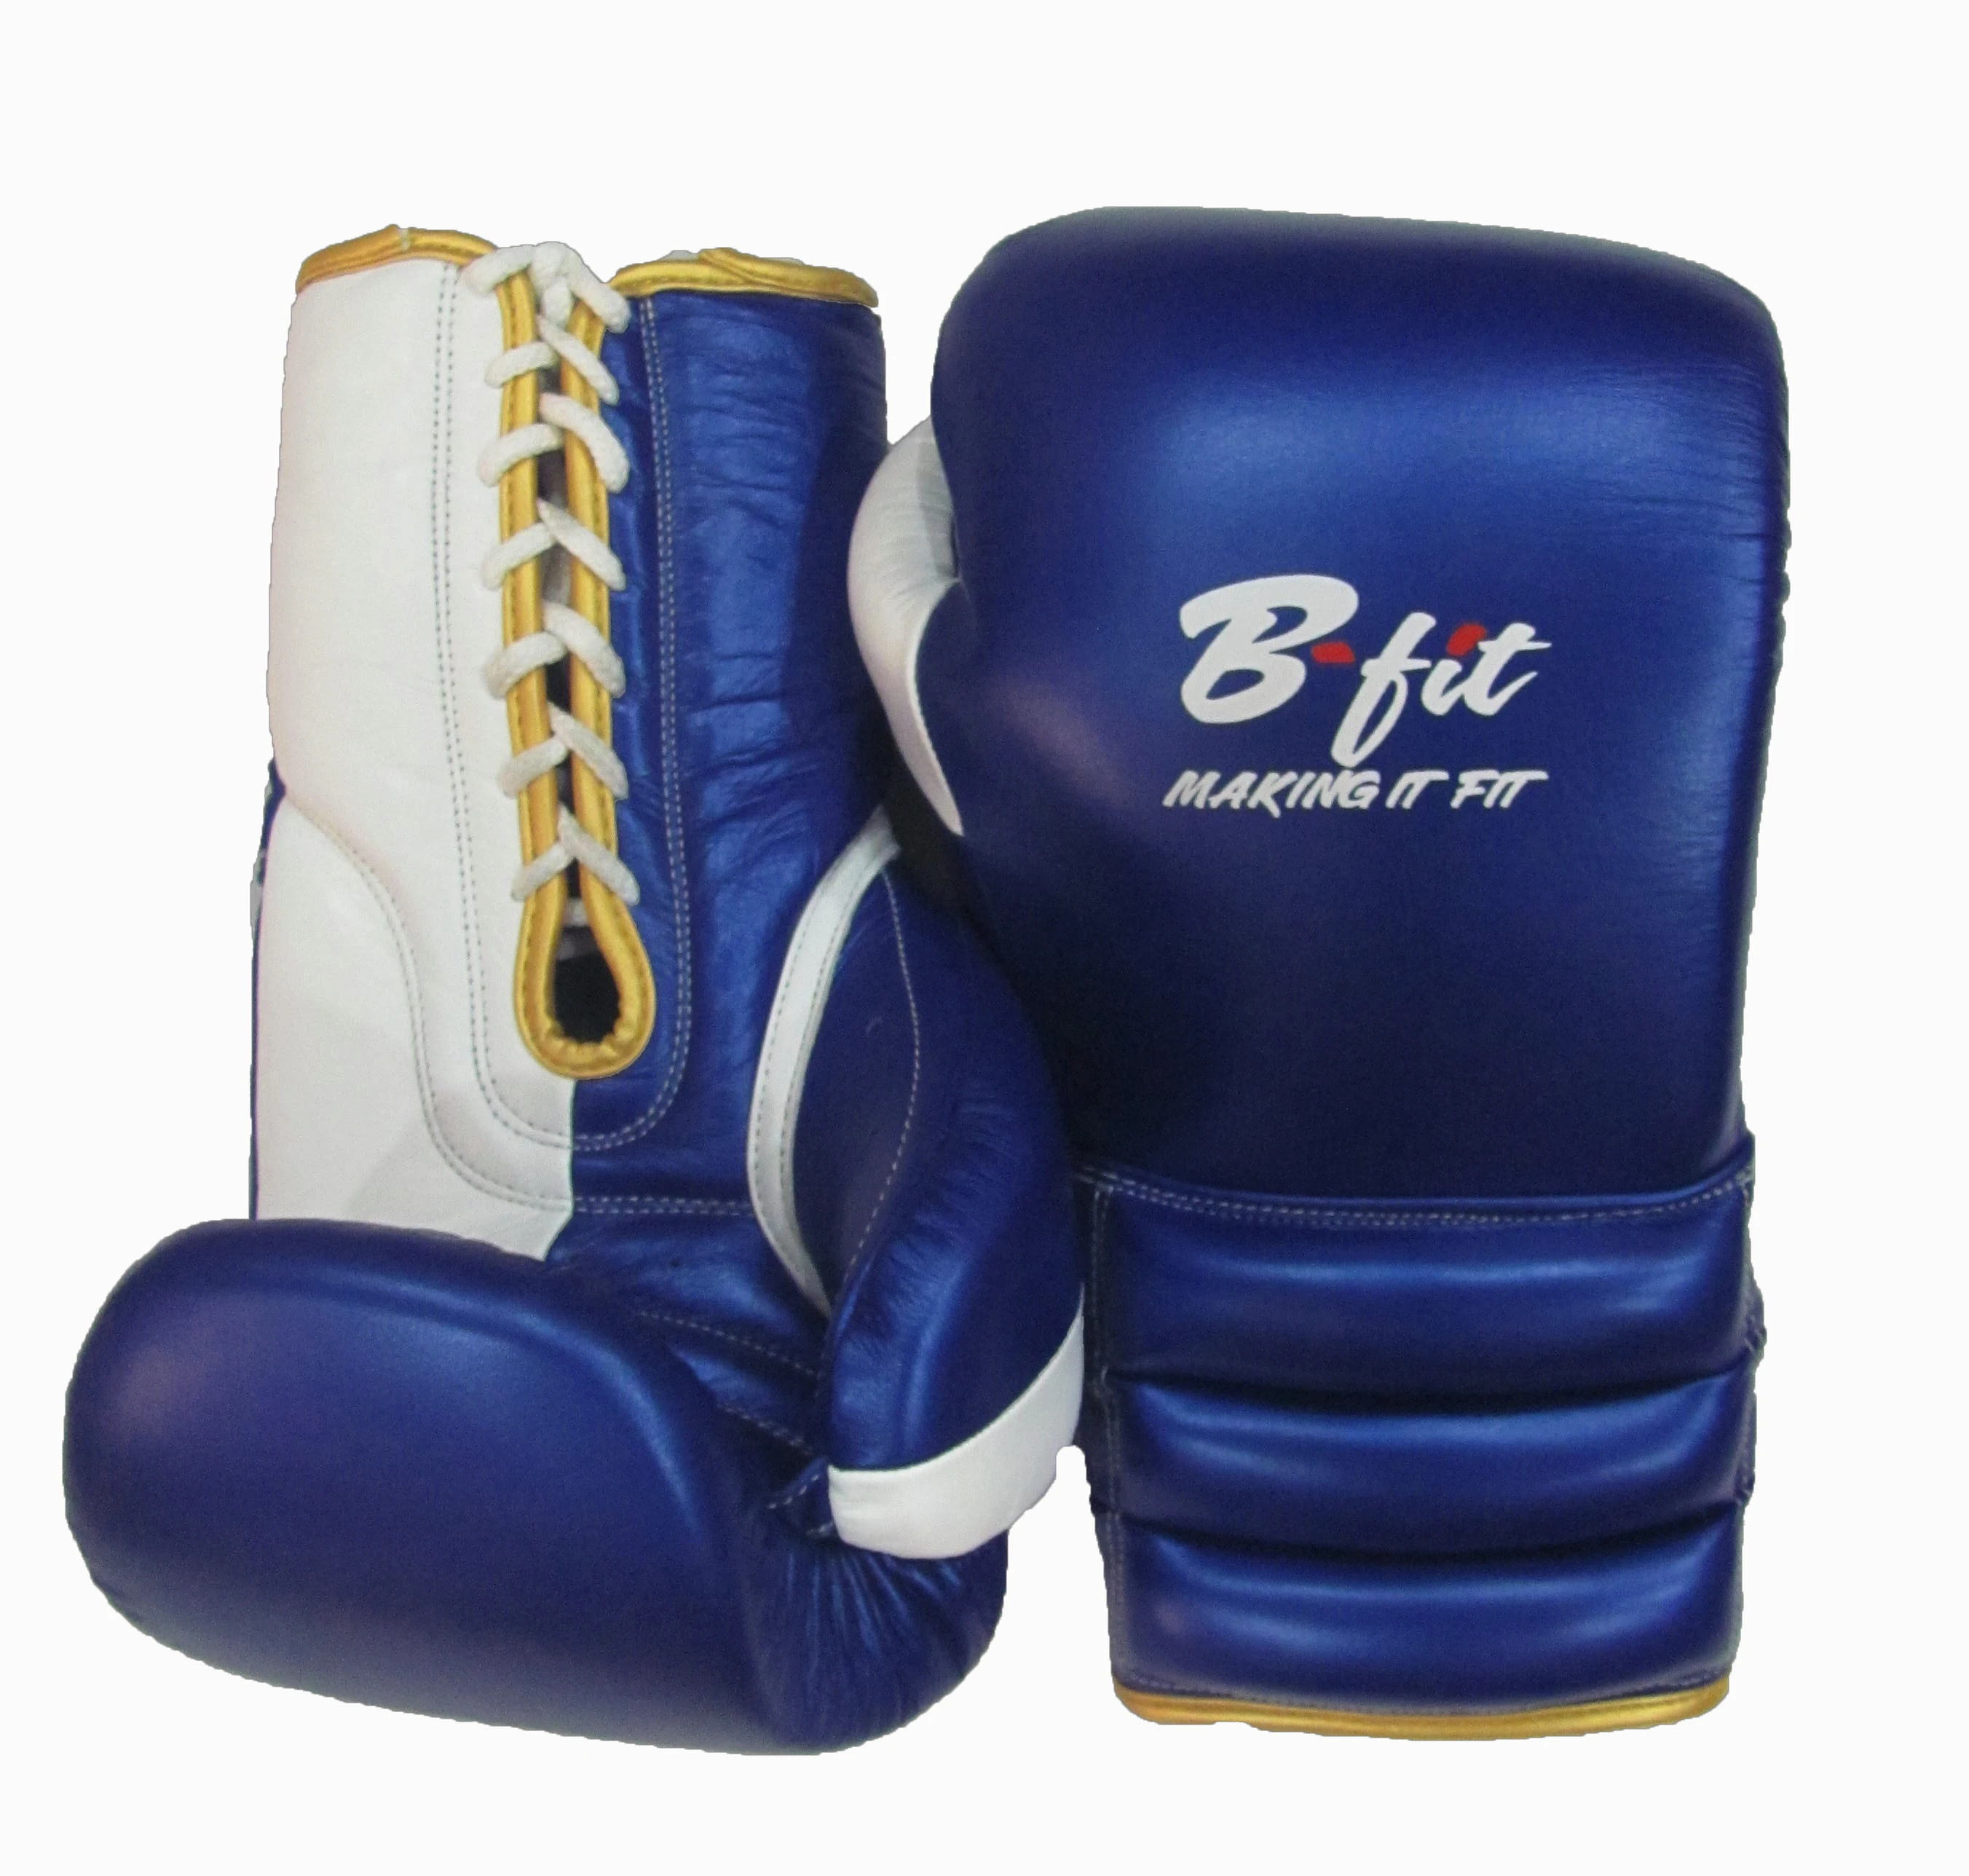 Professional fighting Boxing Gloves Pakistan leather custom logo boxing fighting gloves